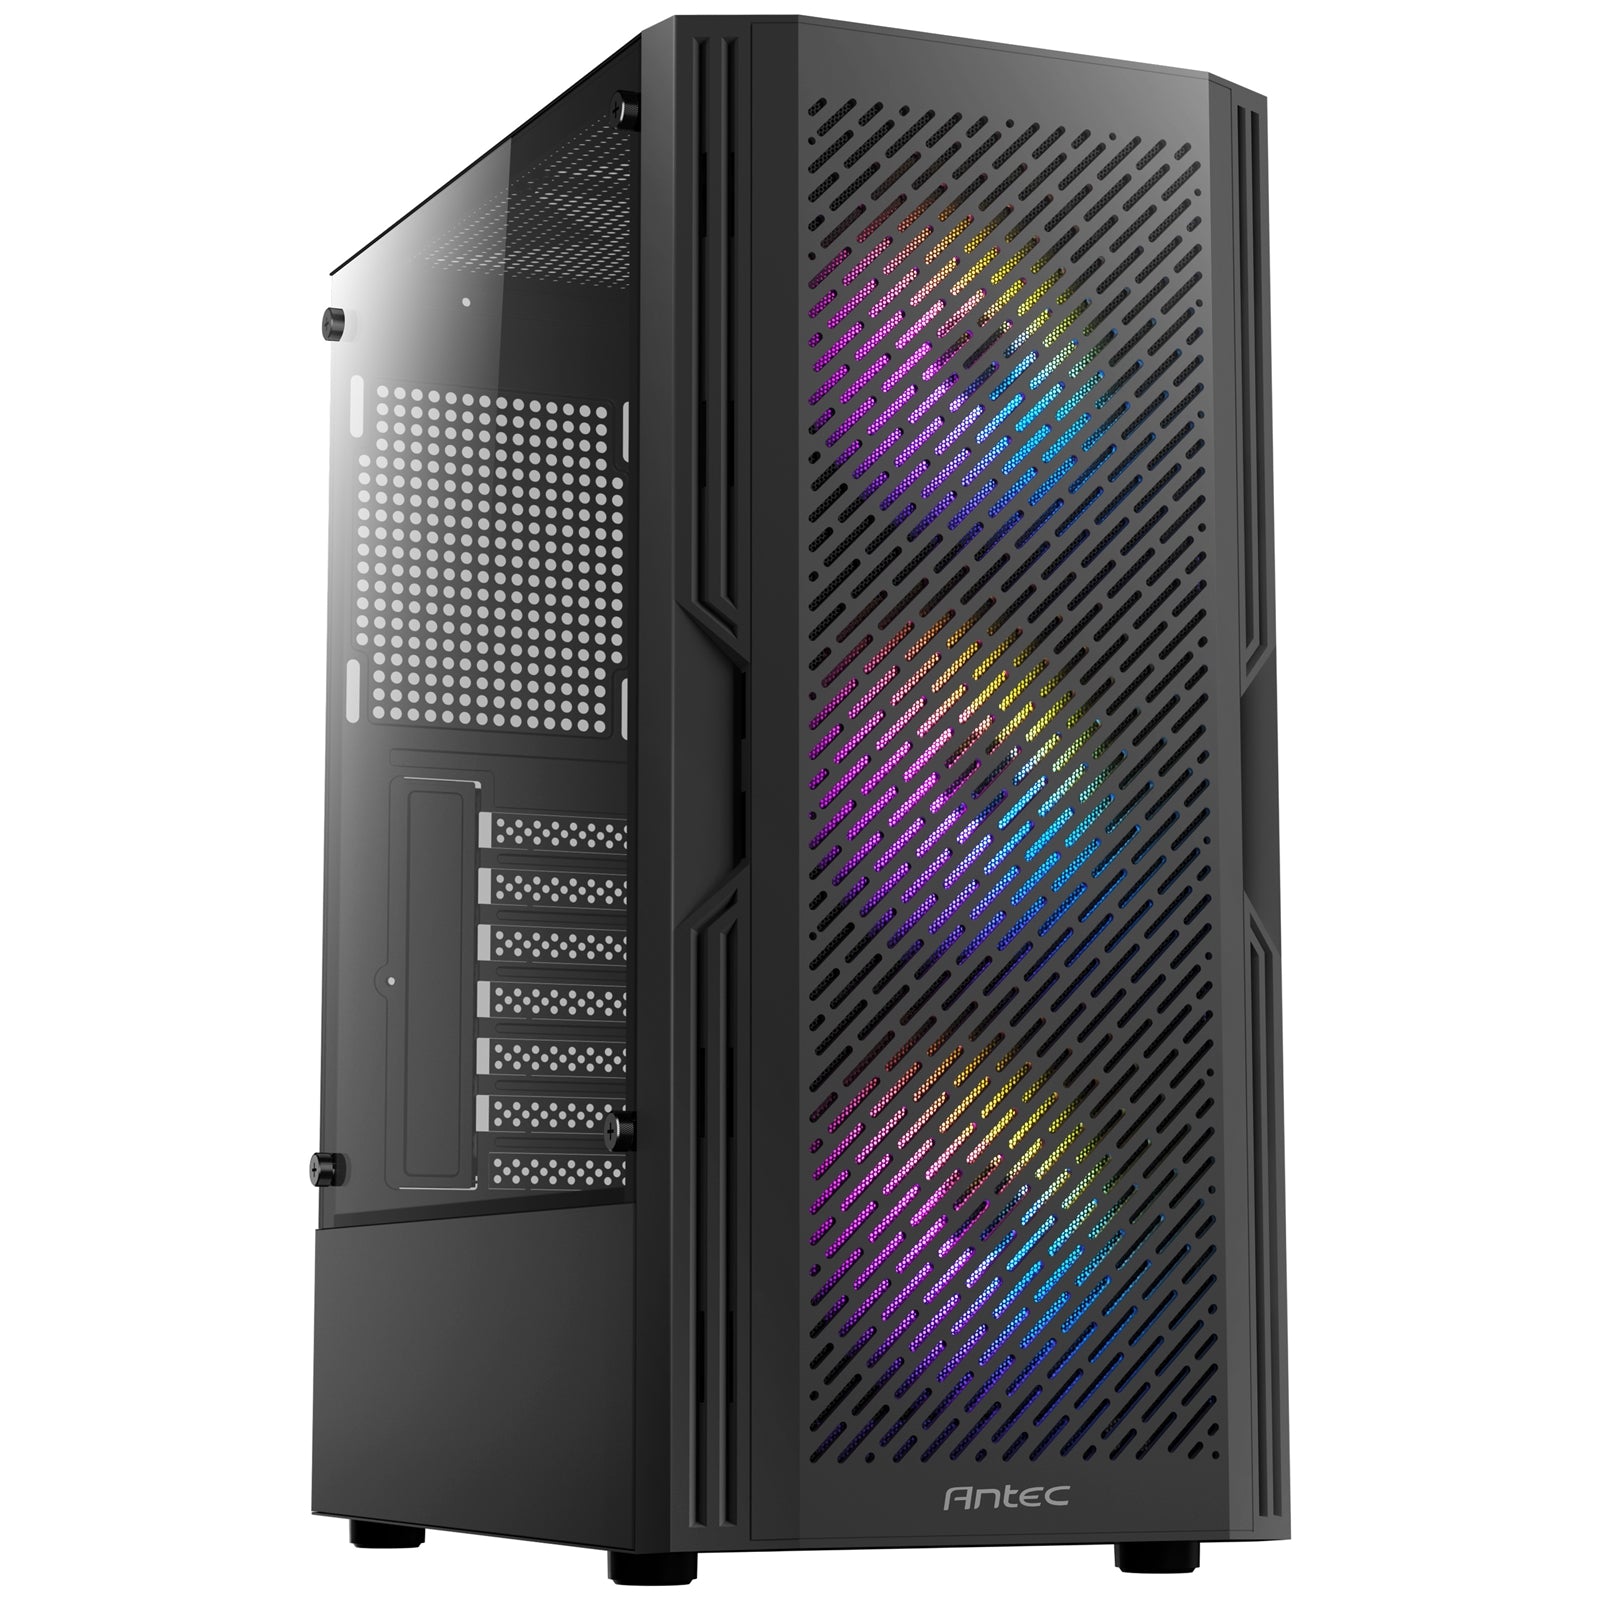 ANTEC AX20 Black Mid-Tower Case with High Airflow Design and RGB Fans